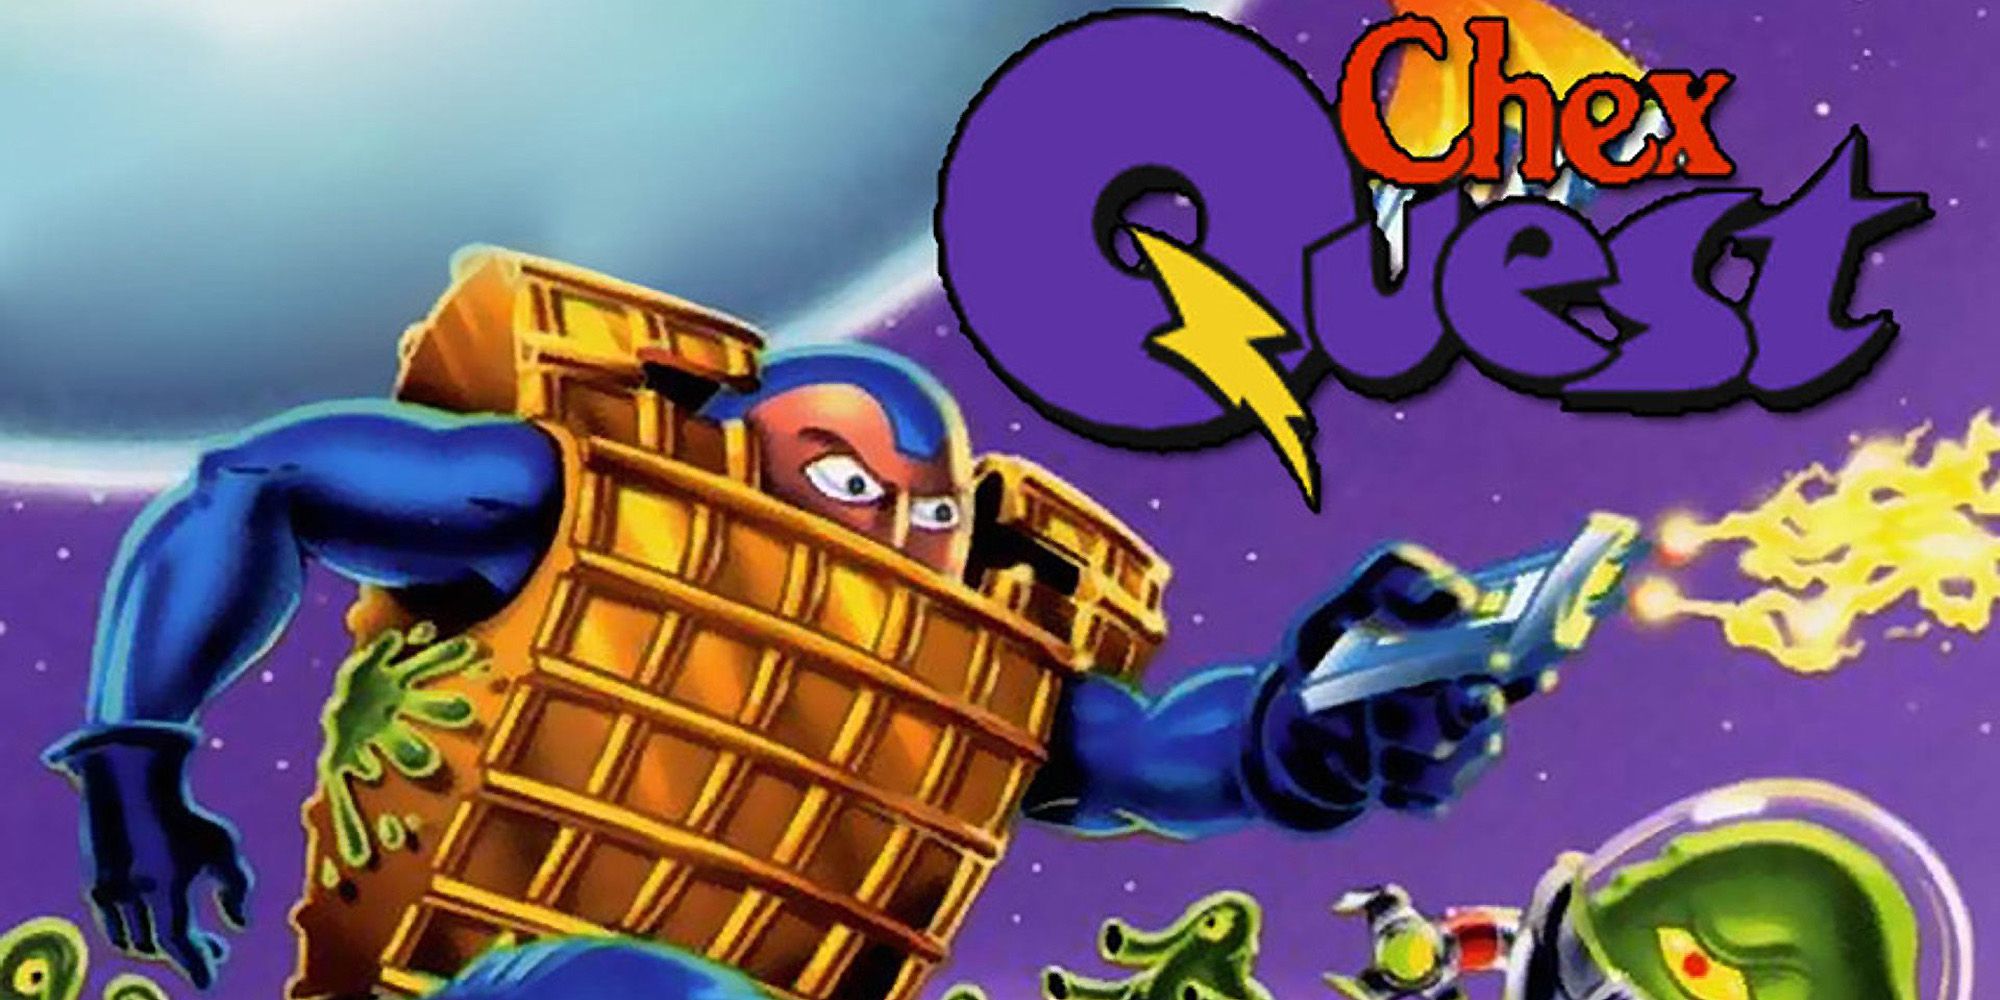 chex-quest-hd-from-cereal-pack-in-to-cult-classic